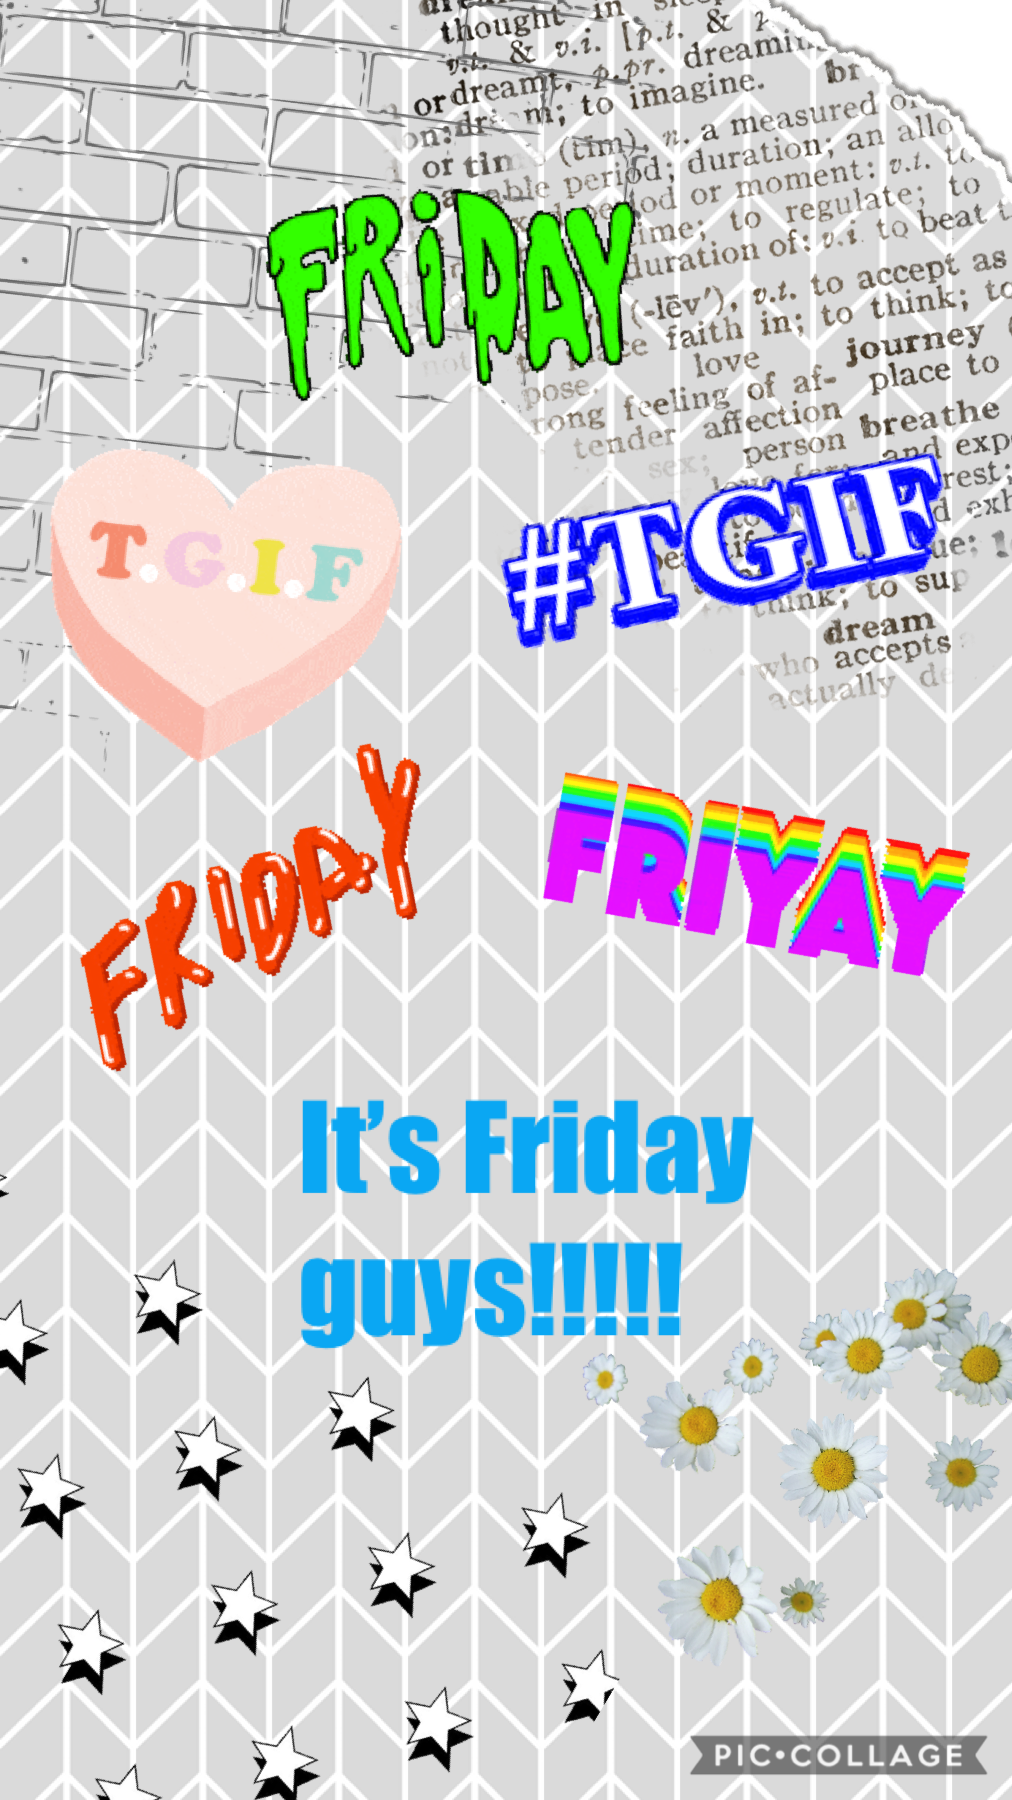 Happy Friday y’all!!! TGIF (thank God it’s Friday) seriously!!! Enjoy your night and remember God loves you!!!!